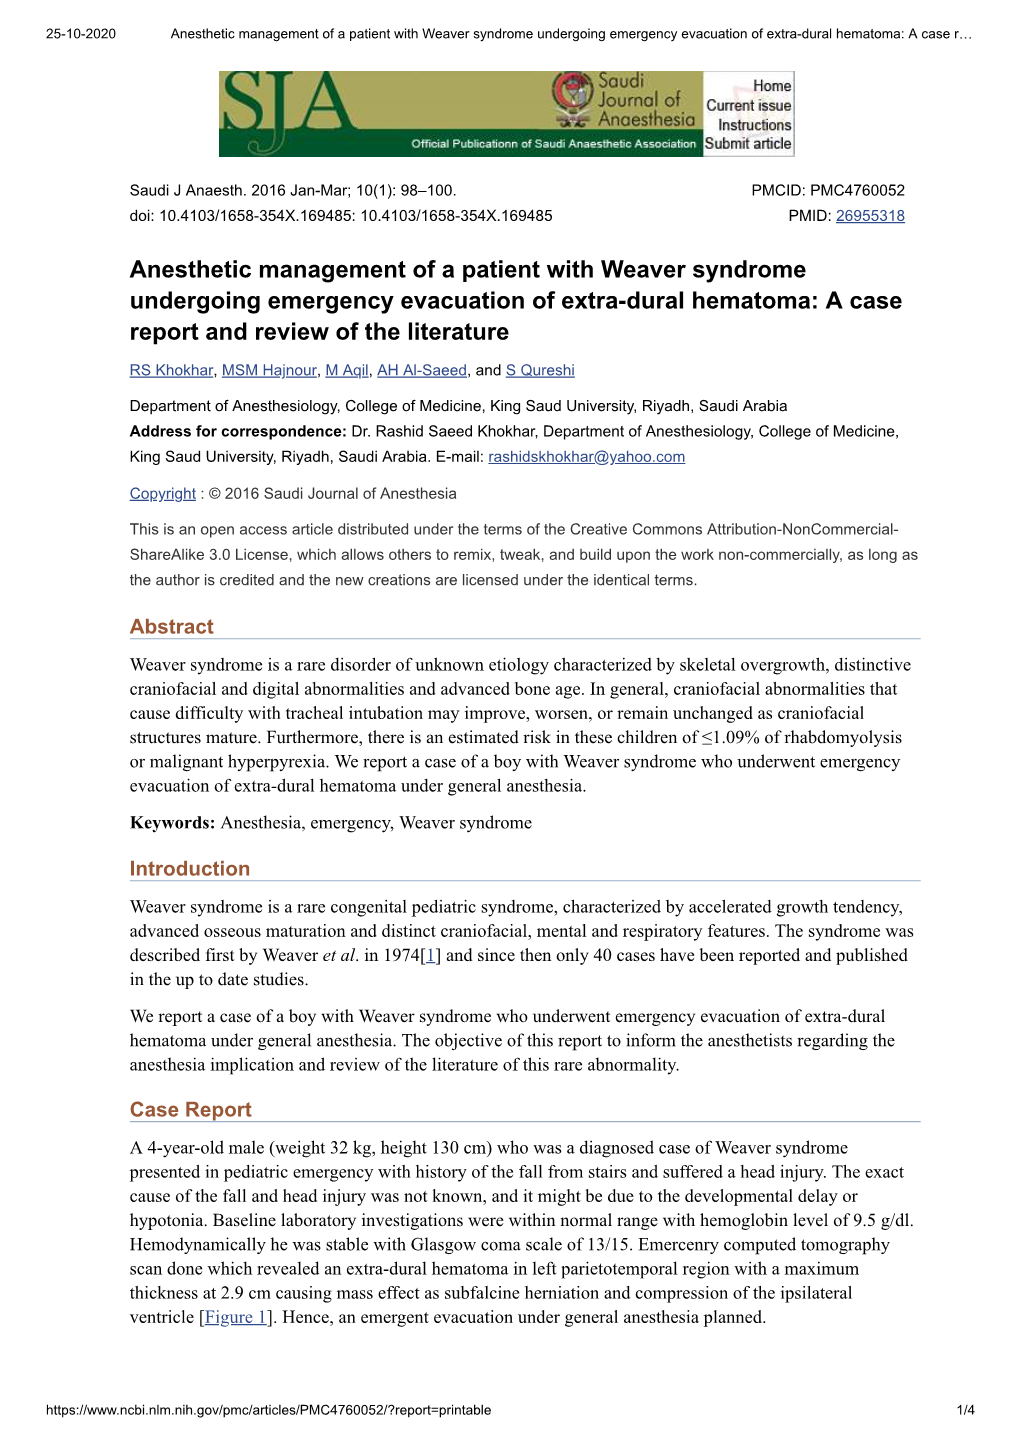 Anesthetic Management of a Patient with Weaver Syndrome Undergoing Emergency Evacuation of Extra-Dural Hematoma: a Case R…